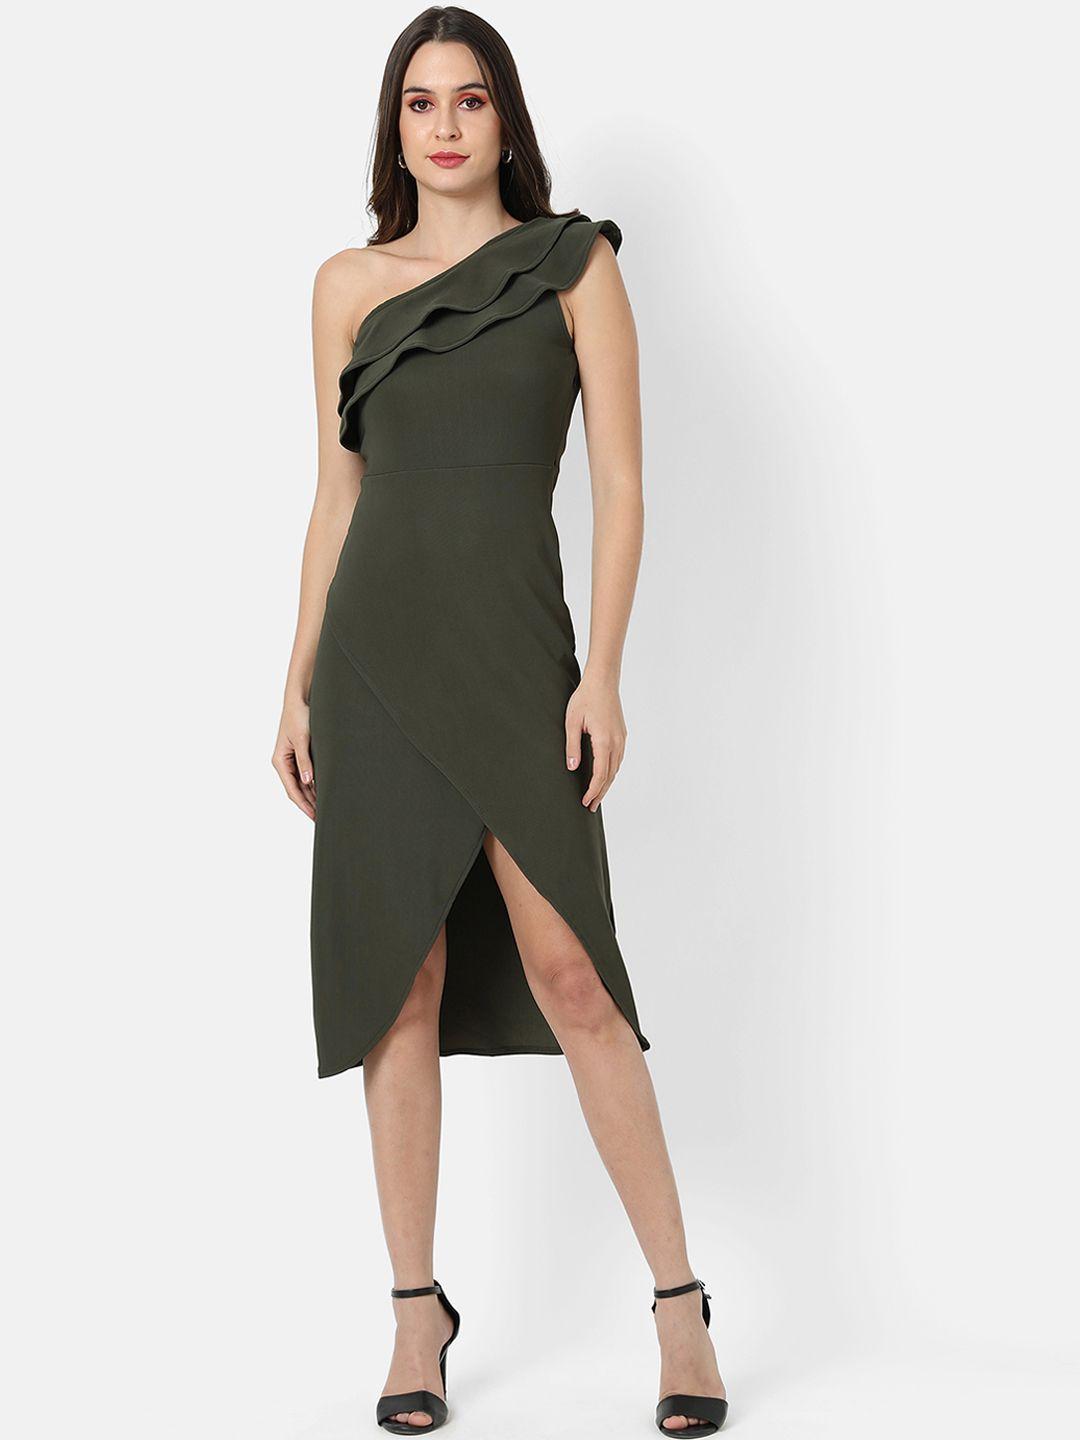 campus sutra olive green one shoulder crepe a-line midi dress